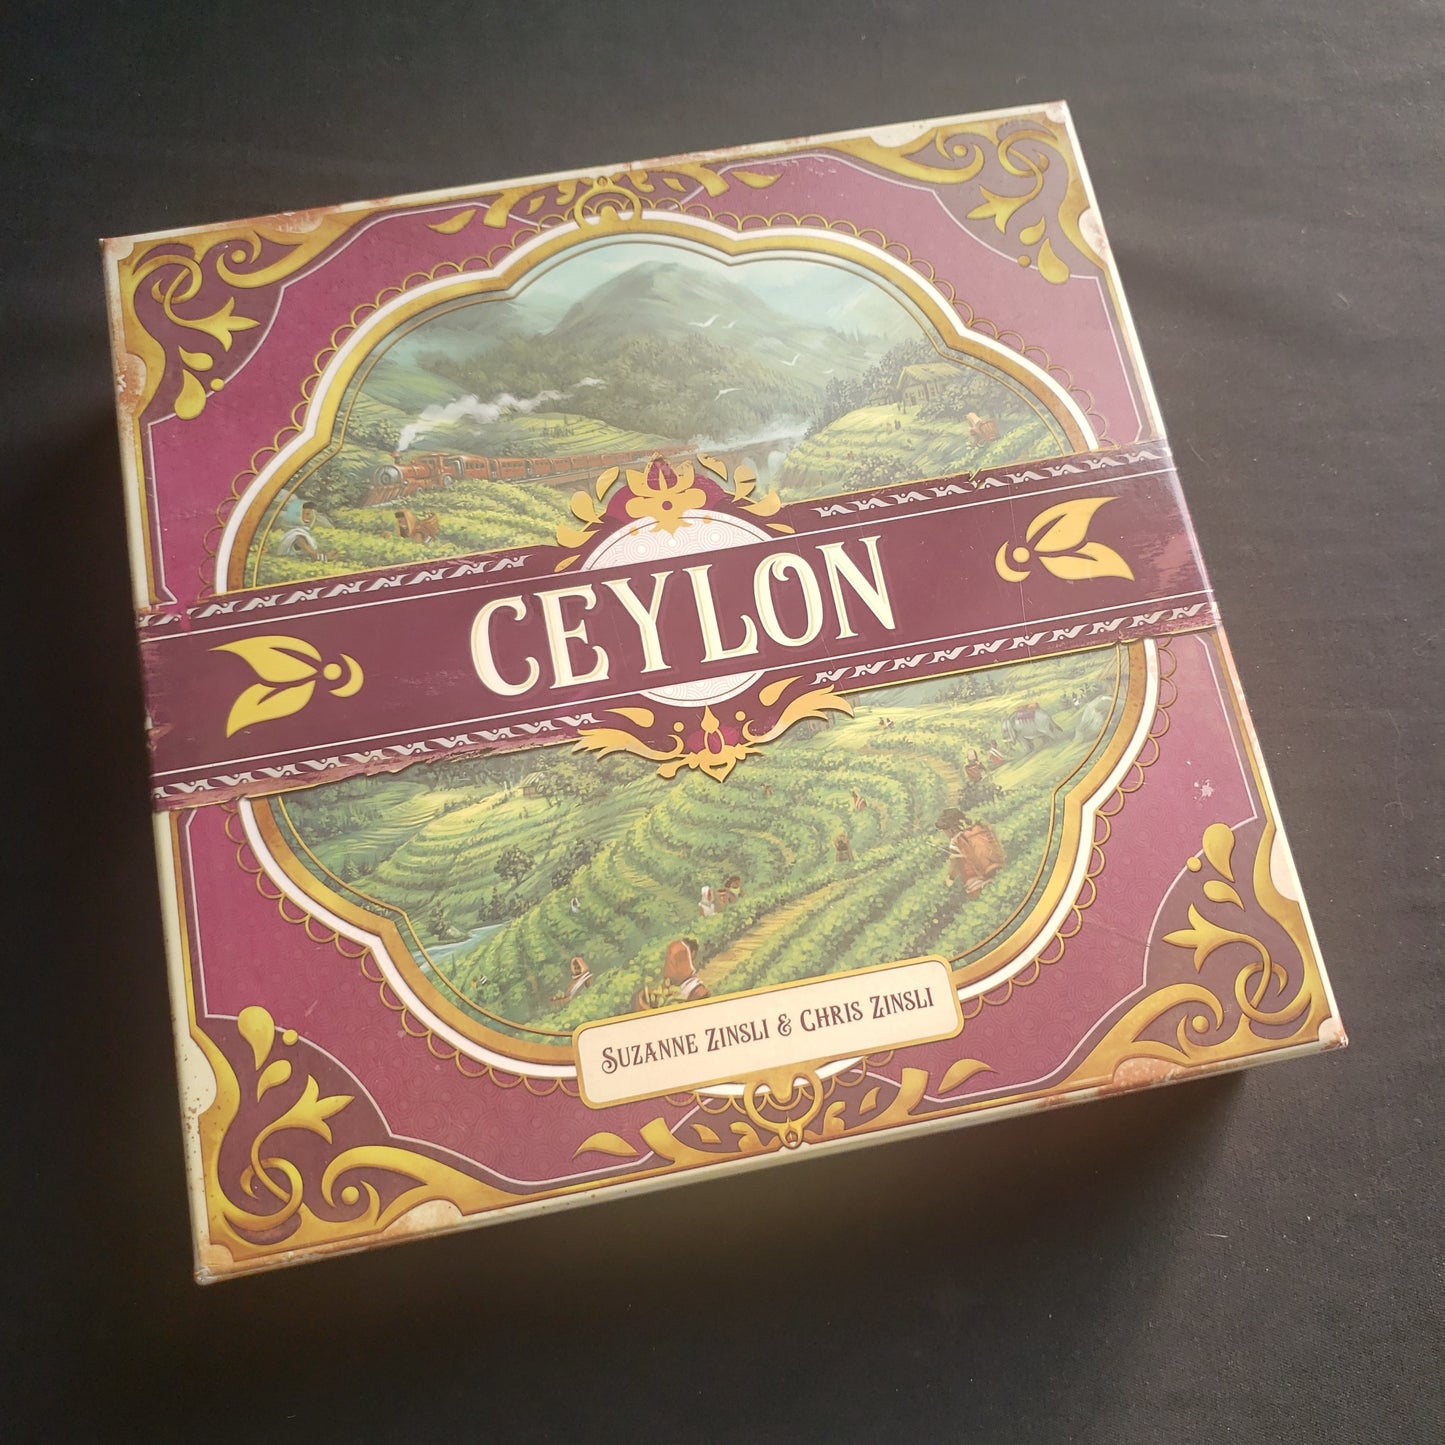 Image shows the front cover of the box of the Ceylon board game